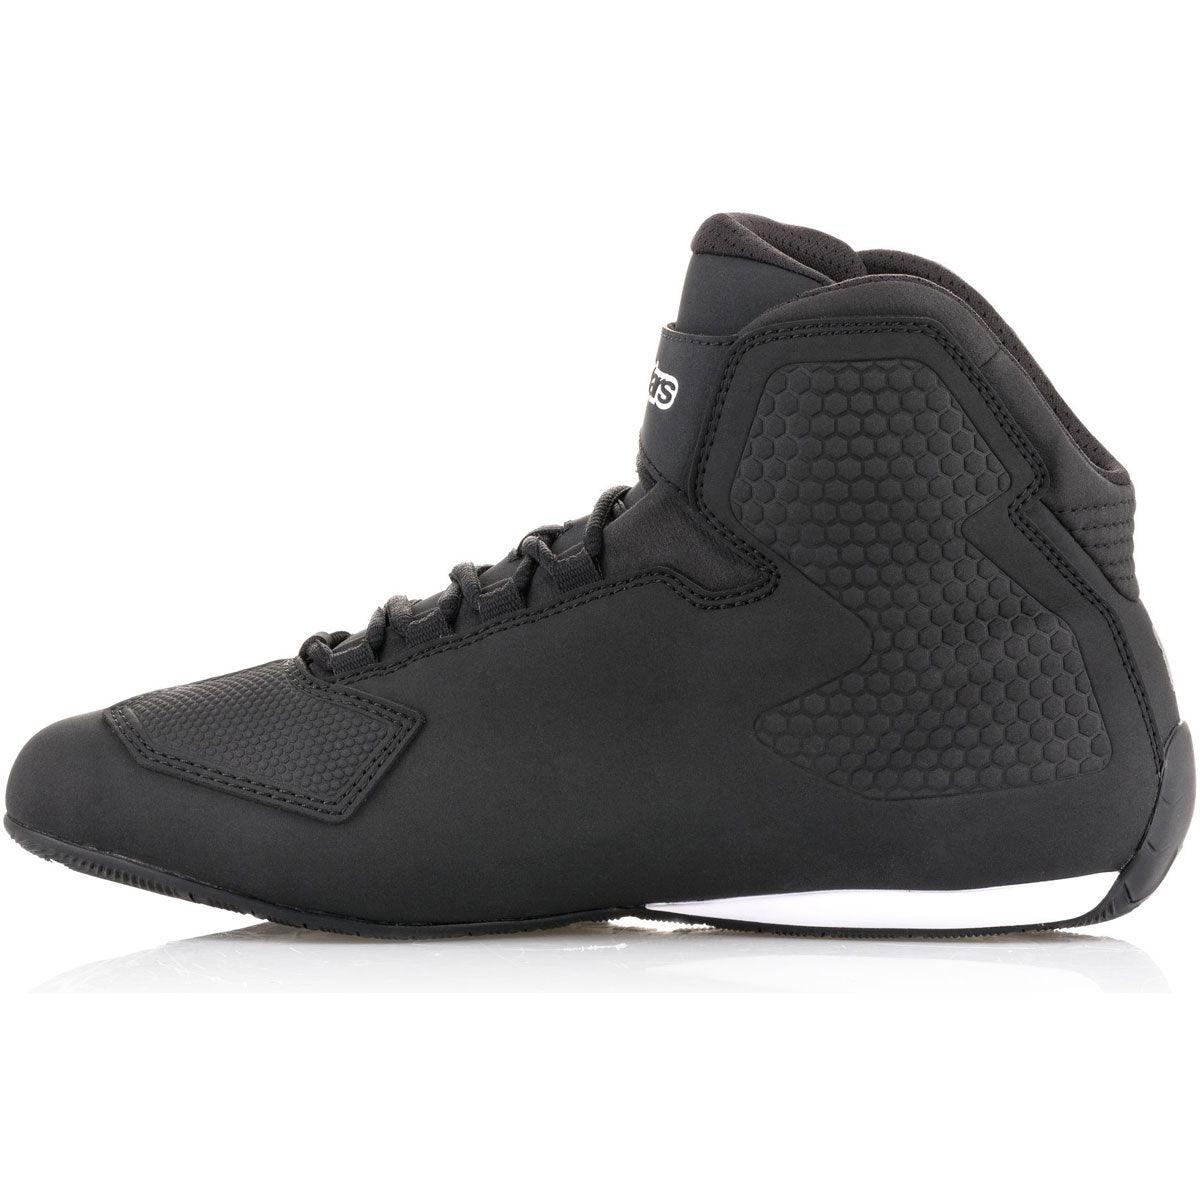 Alpinestars Sektor Shoes Black - Motorcycle Trainers & Casual Shoes